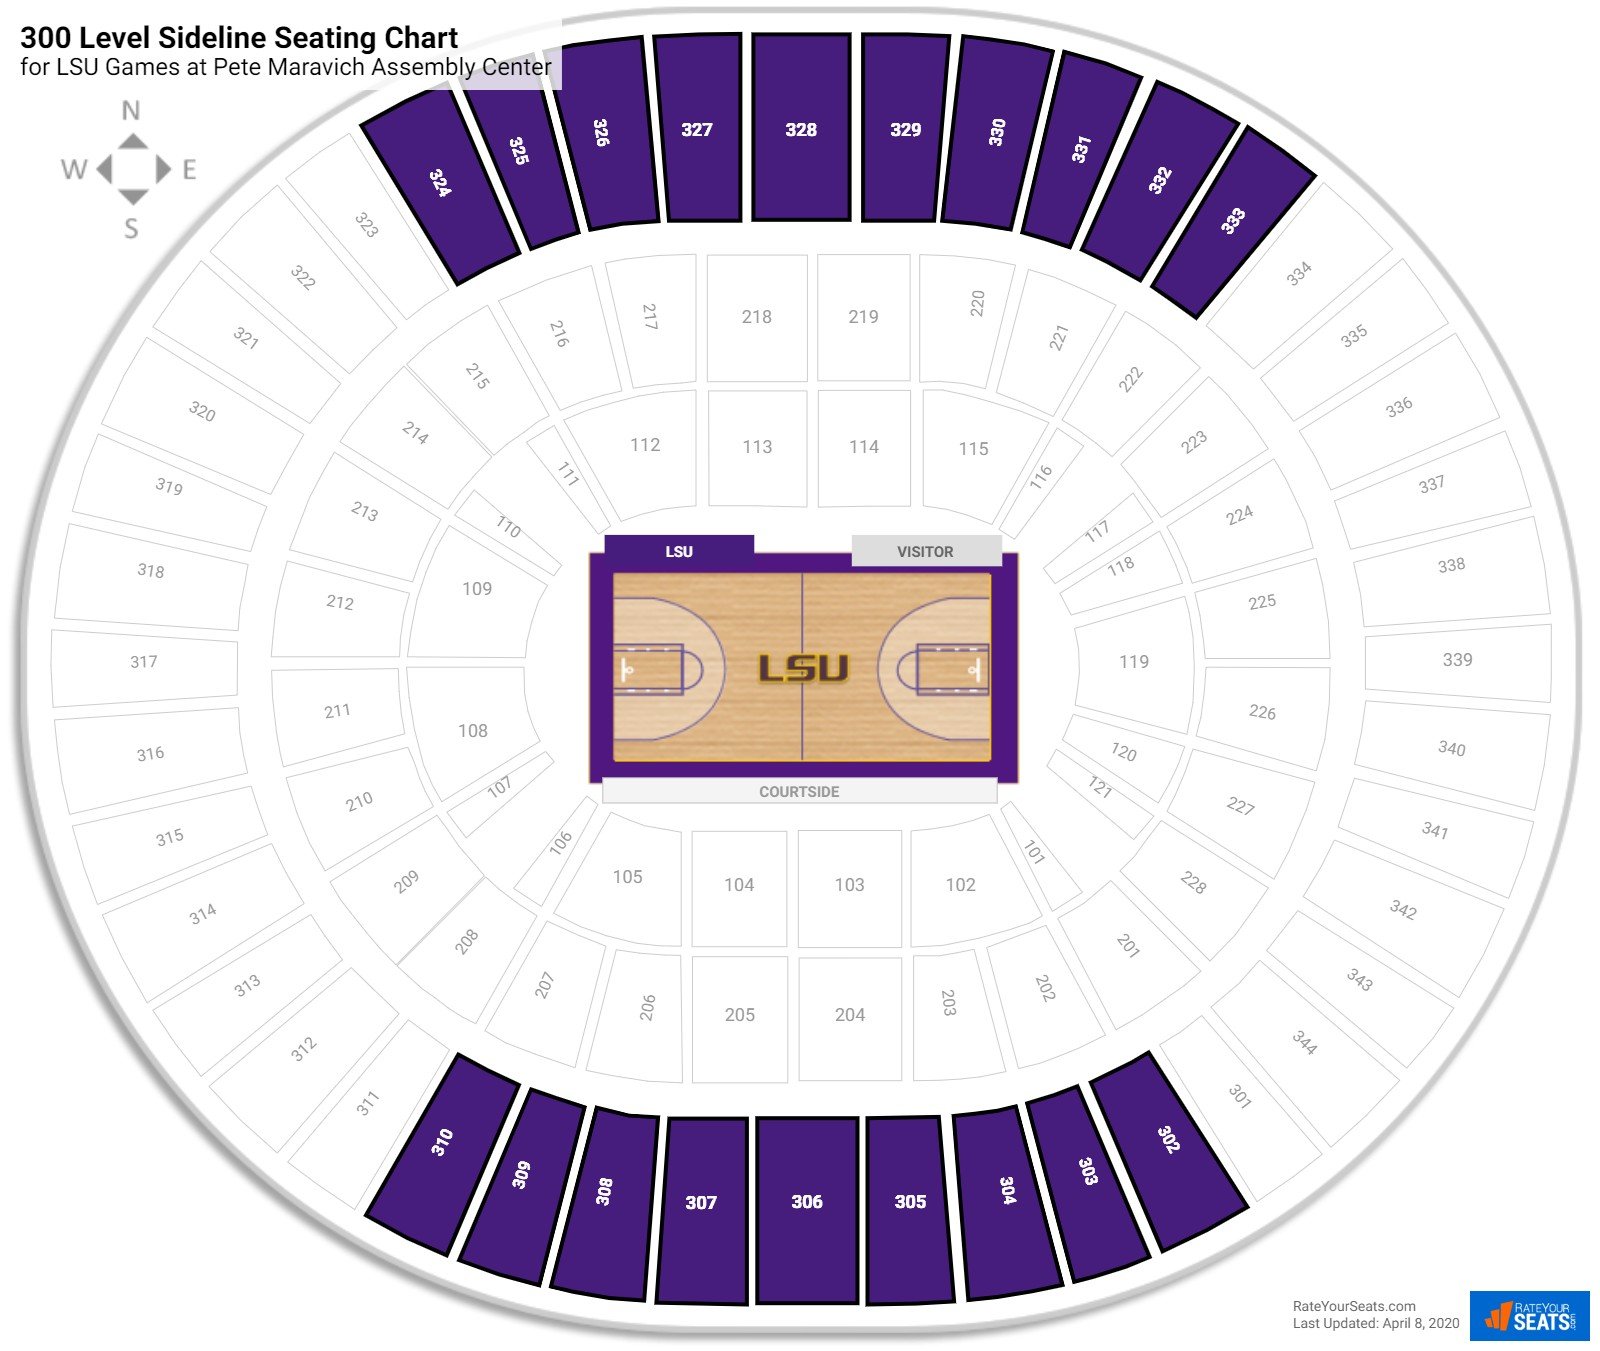 Pete Maravich Assembly Center (LSU) Seating Guide - RateYourSeats.com1600 x 1351